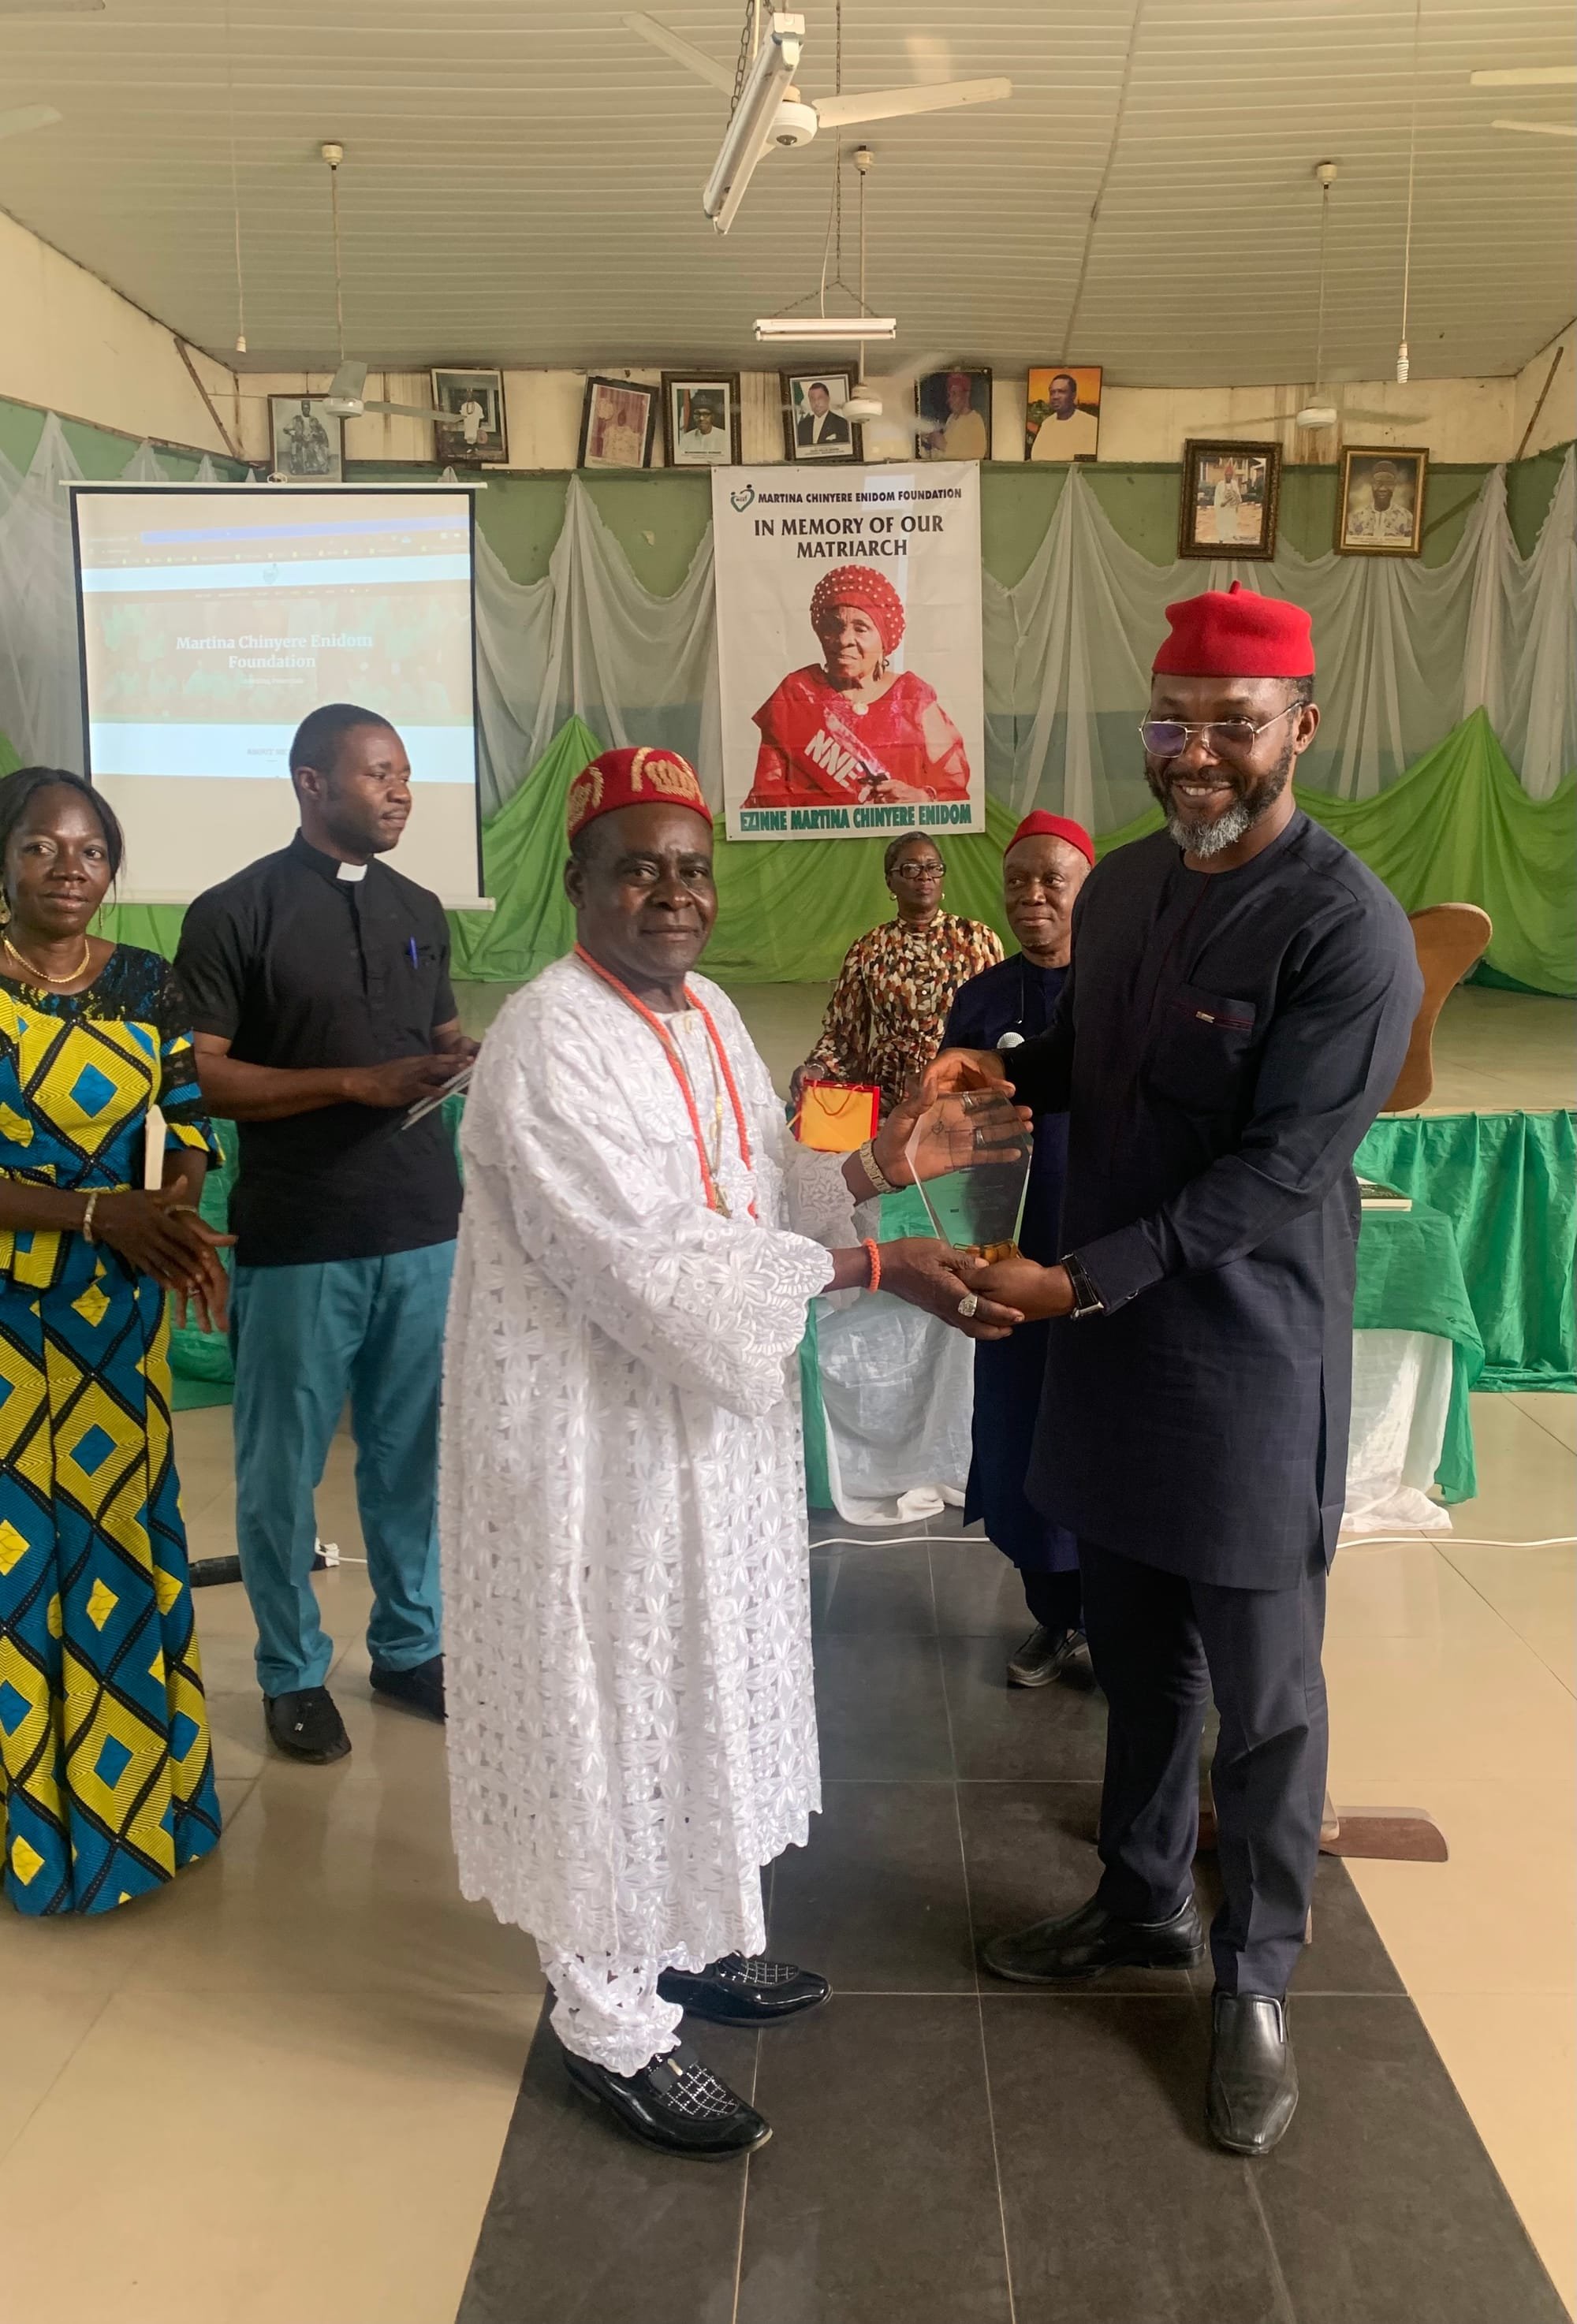 The Chairman of the occasion [Chief Osita Chidoka] delivering the award to the representatives of Chinechendo